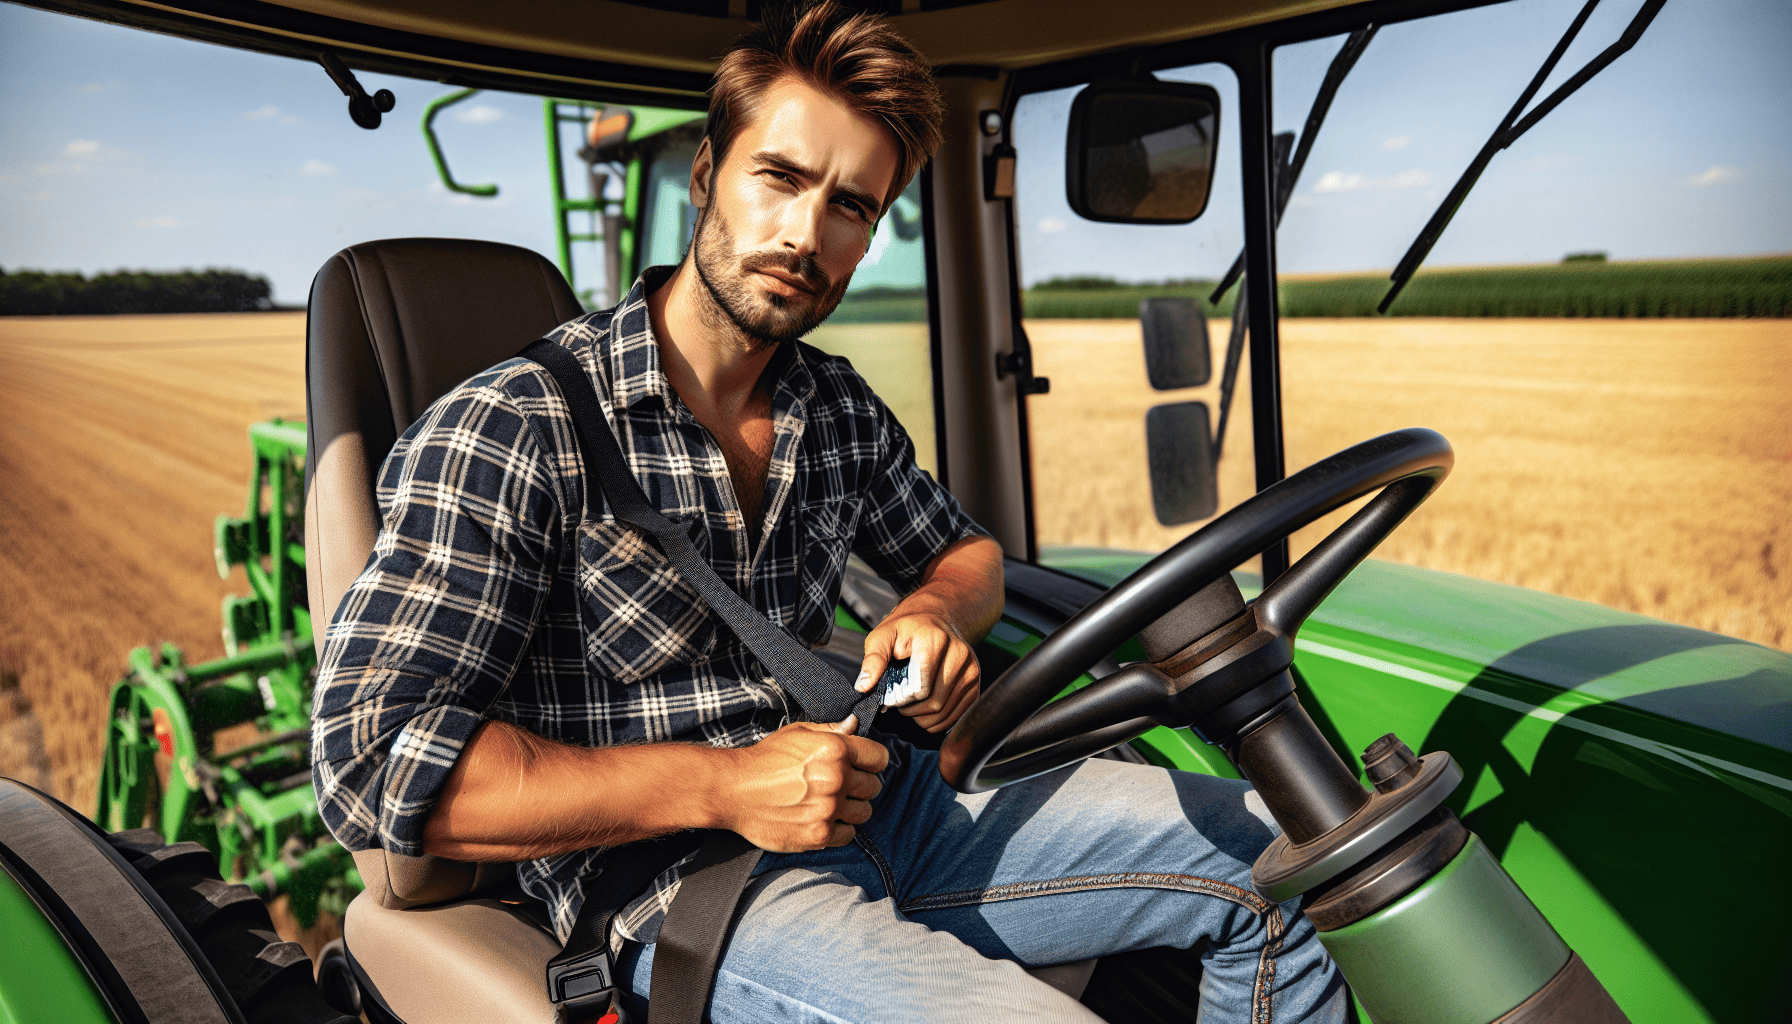 A tractor operator fastening the seat belt for safety